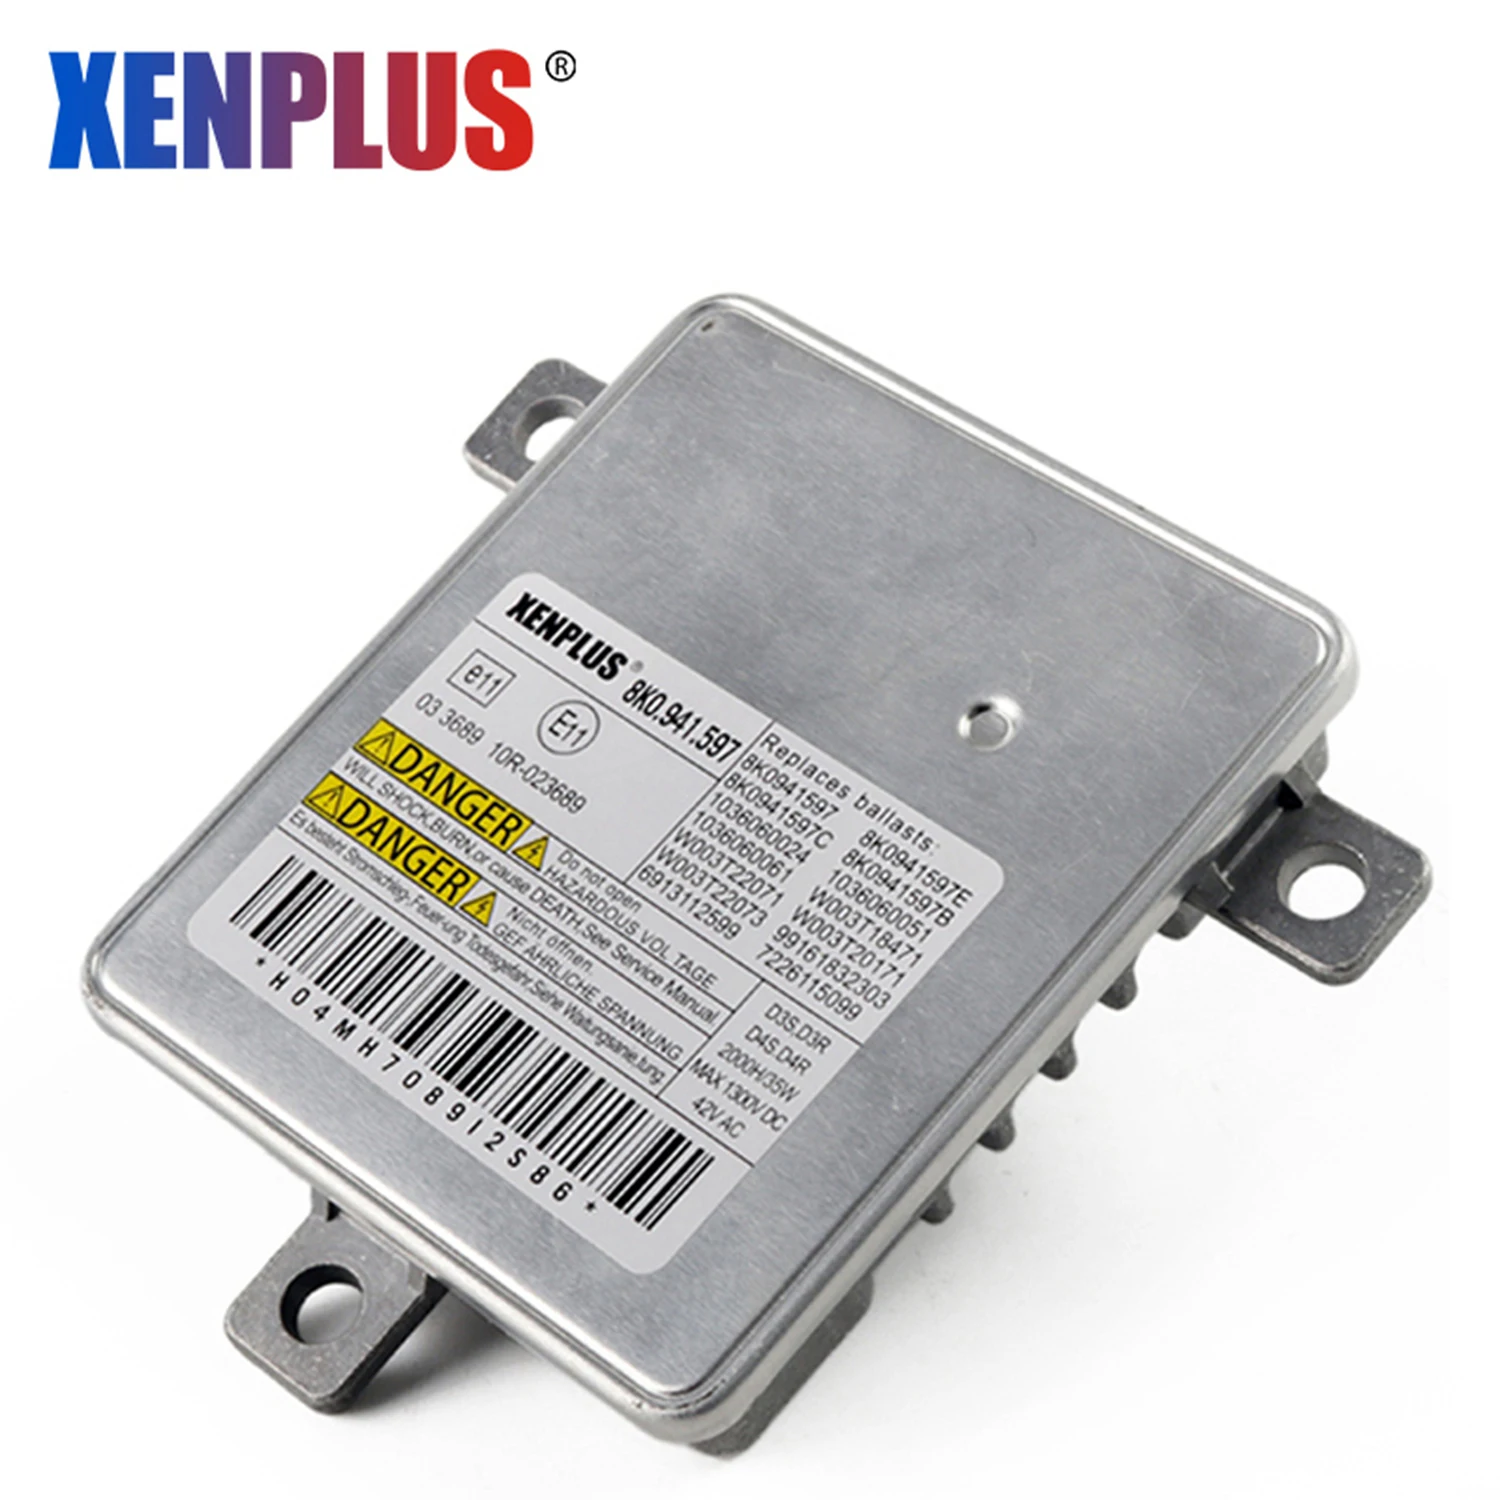 

Xenplus Made in China After Market Replacement Parts Headlight Control Module Ballast 8K0941597 For A3 A4 A5 A6 A7 A8 Q5 Q7